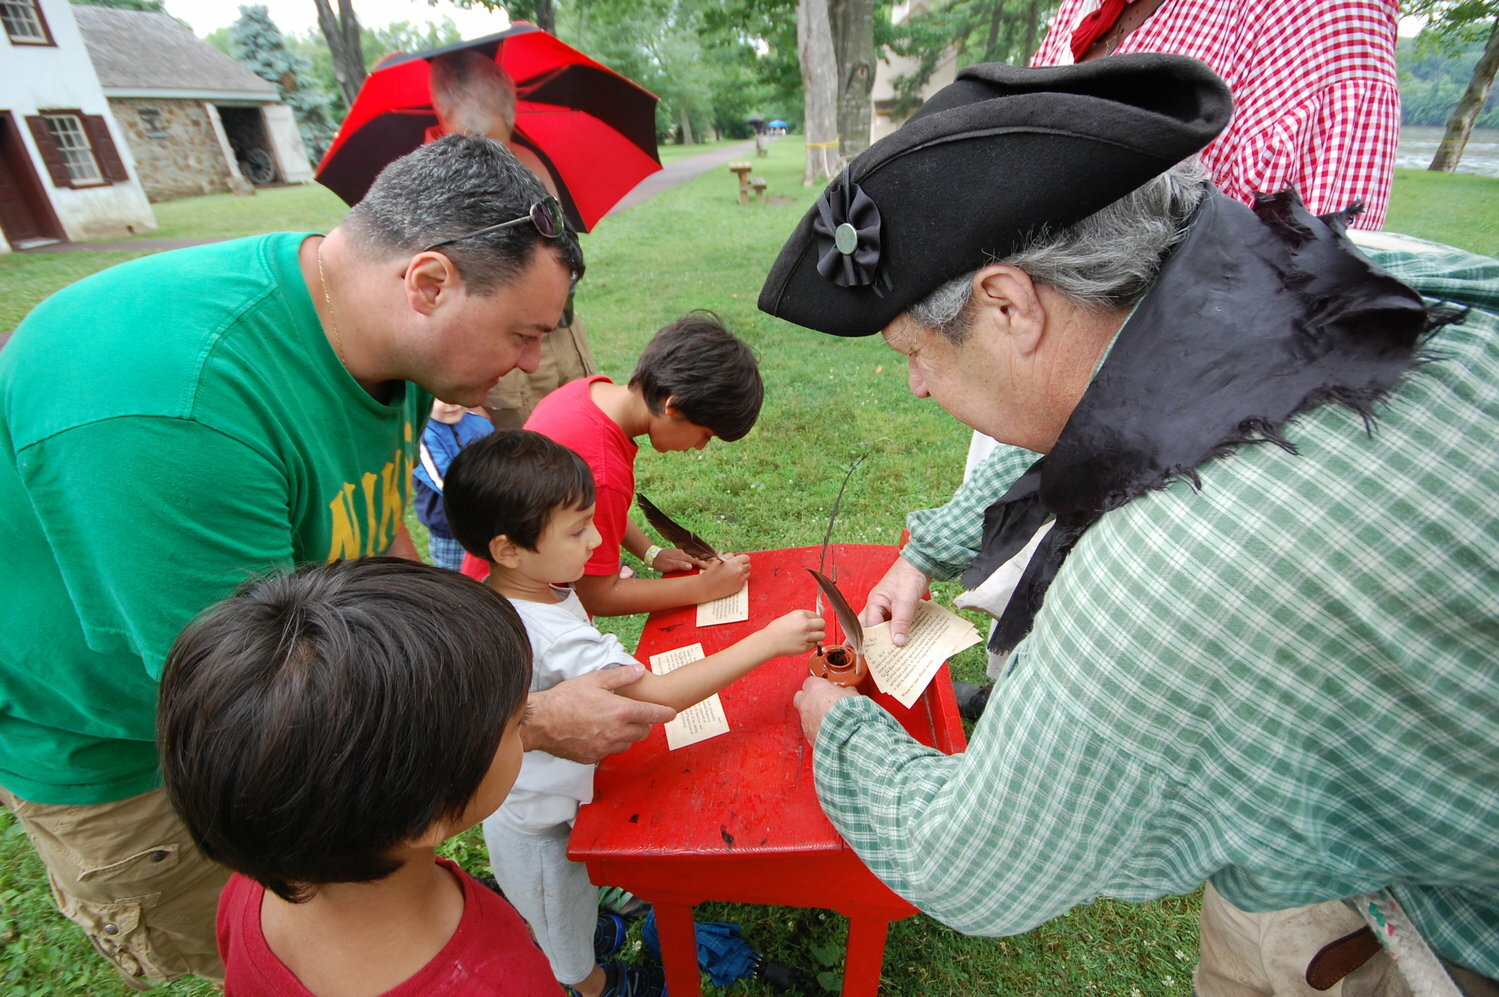 Children “sign up for the Army” at Washington Crossing Historic Park.